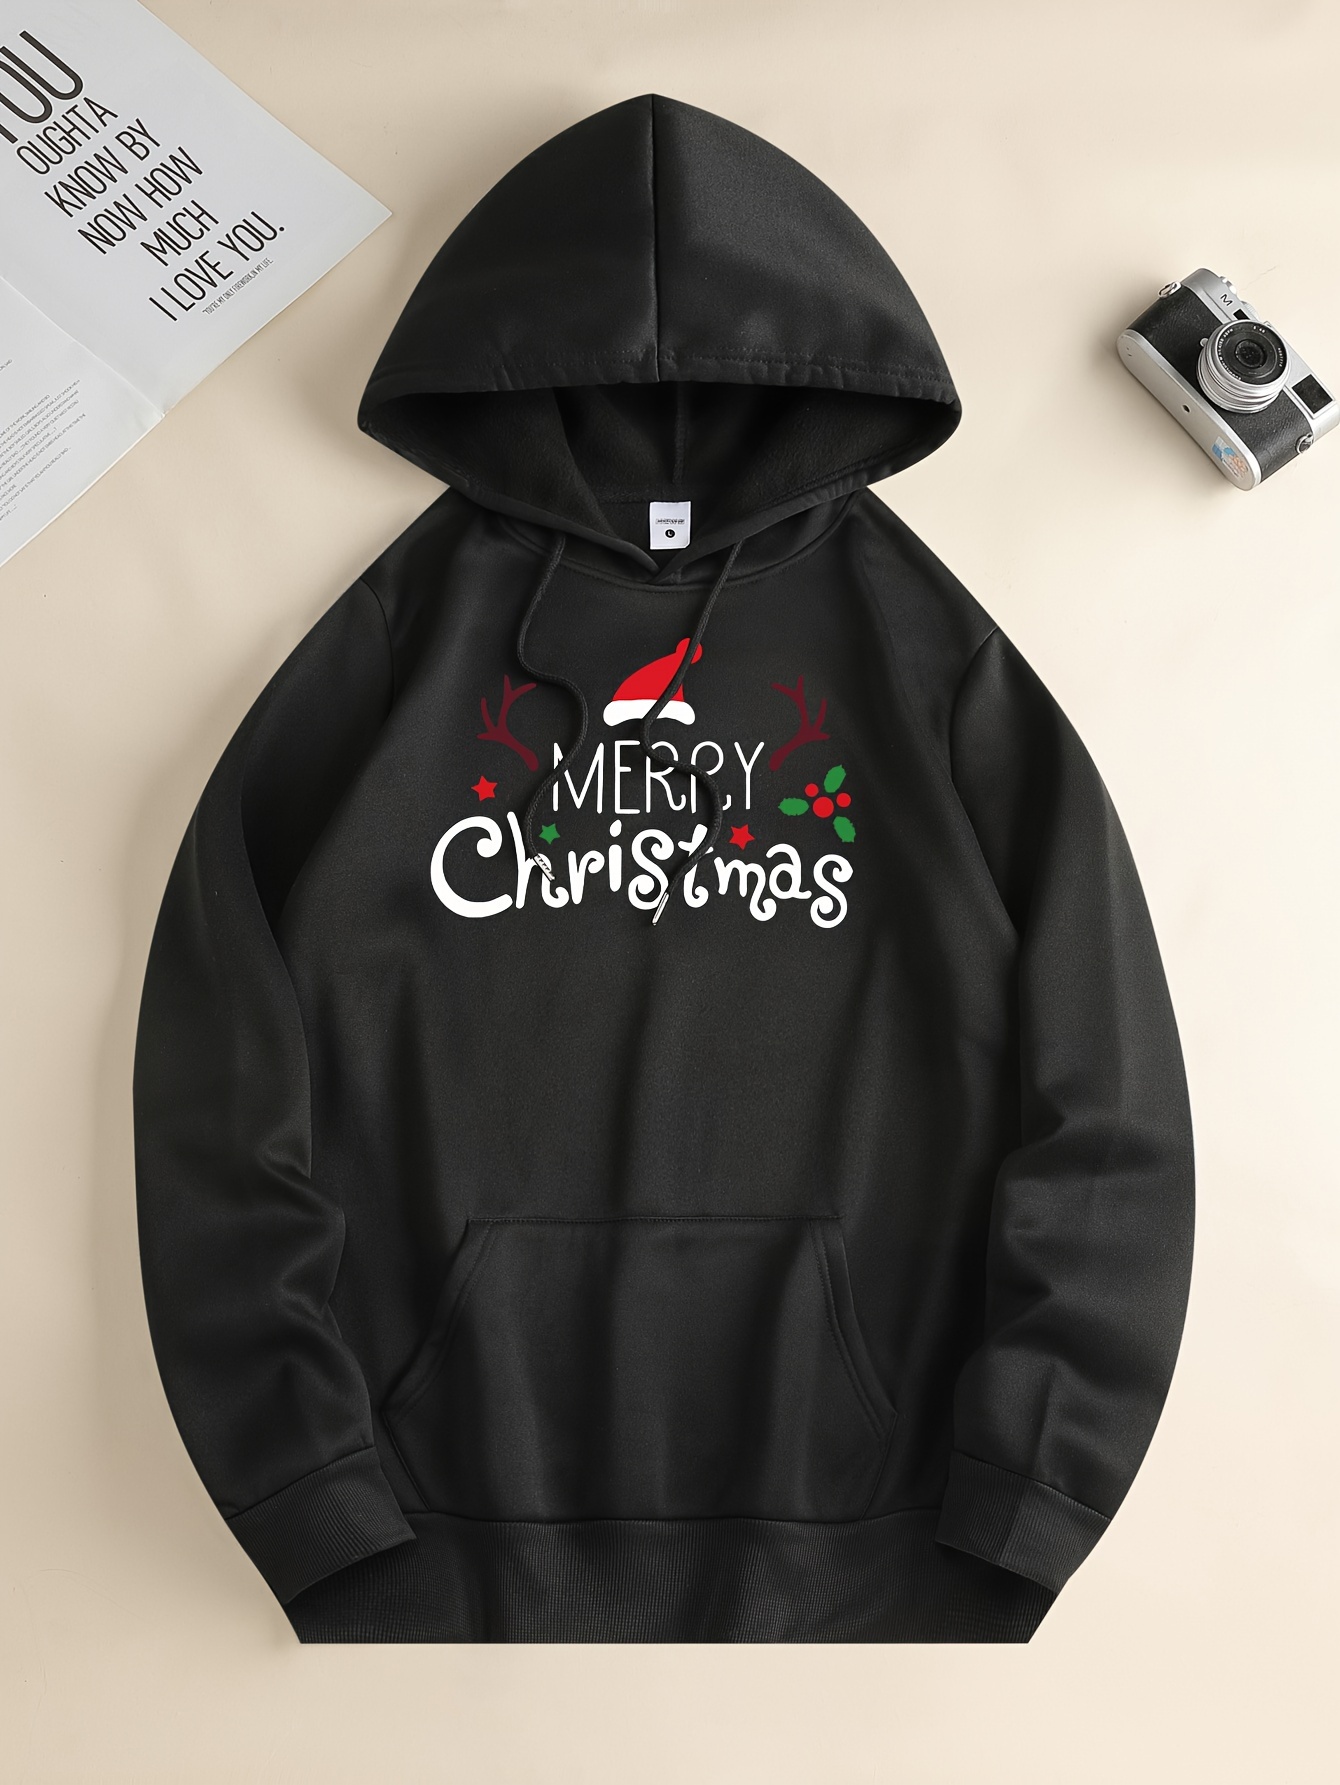 Men's christmas graphic printed hoodies hooded long sleeve sweatshirts  autumn outdoor casual tee shirts party